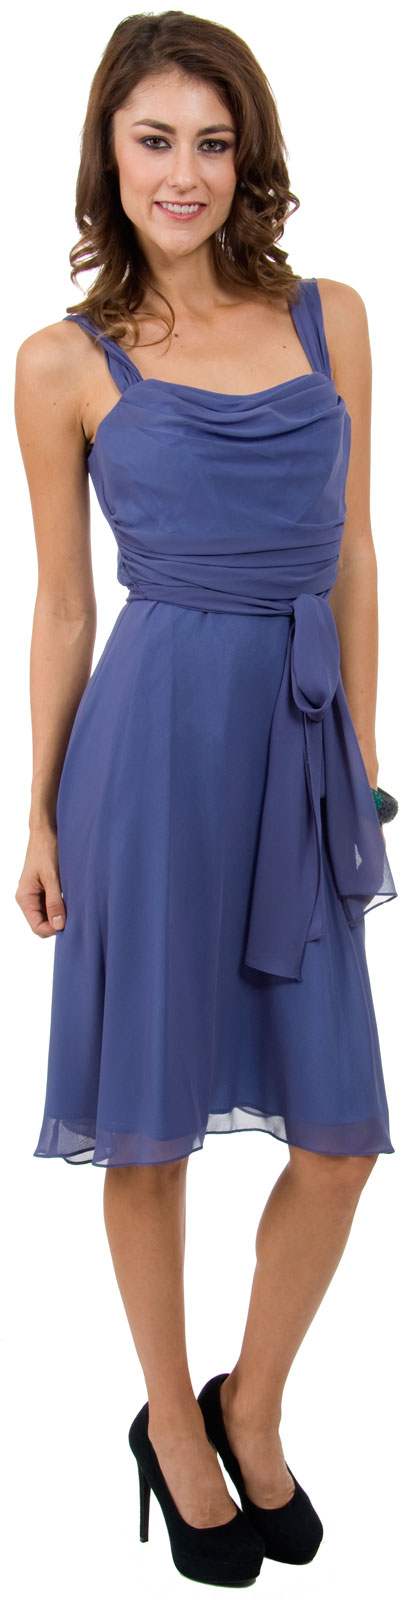 Image of Cowl Neck Knee Length Bridesmaid Party Dress  in an alternative picture